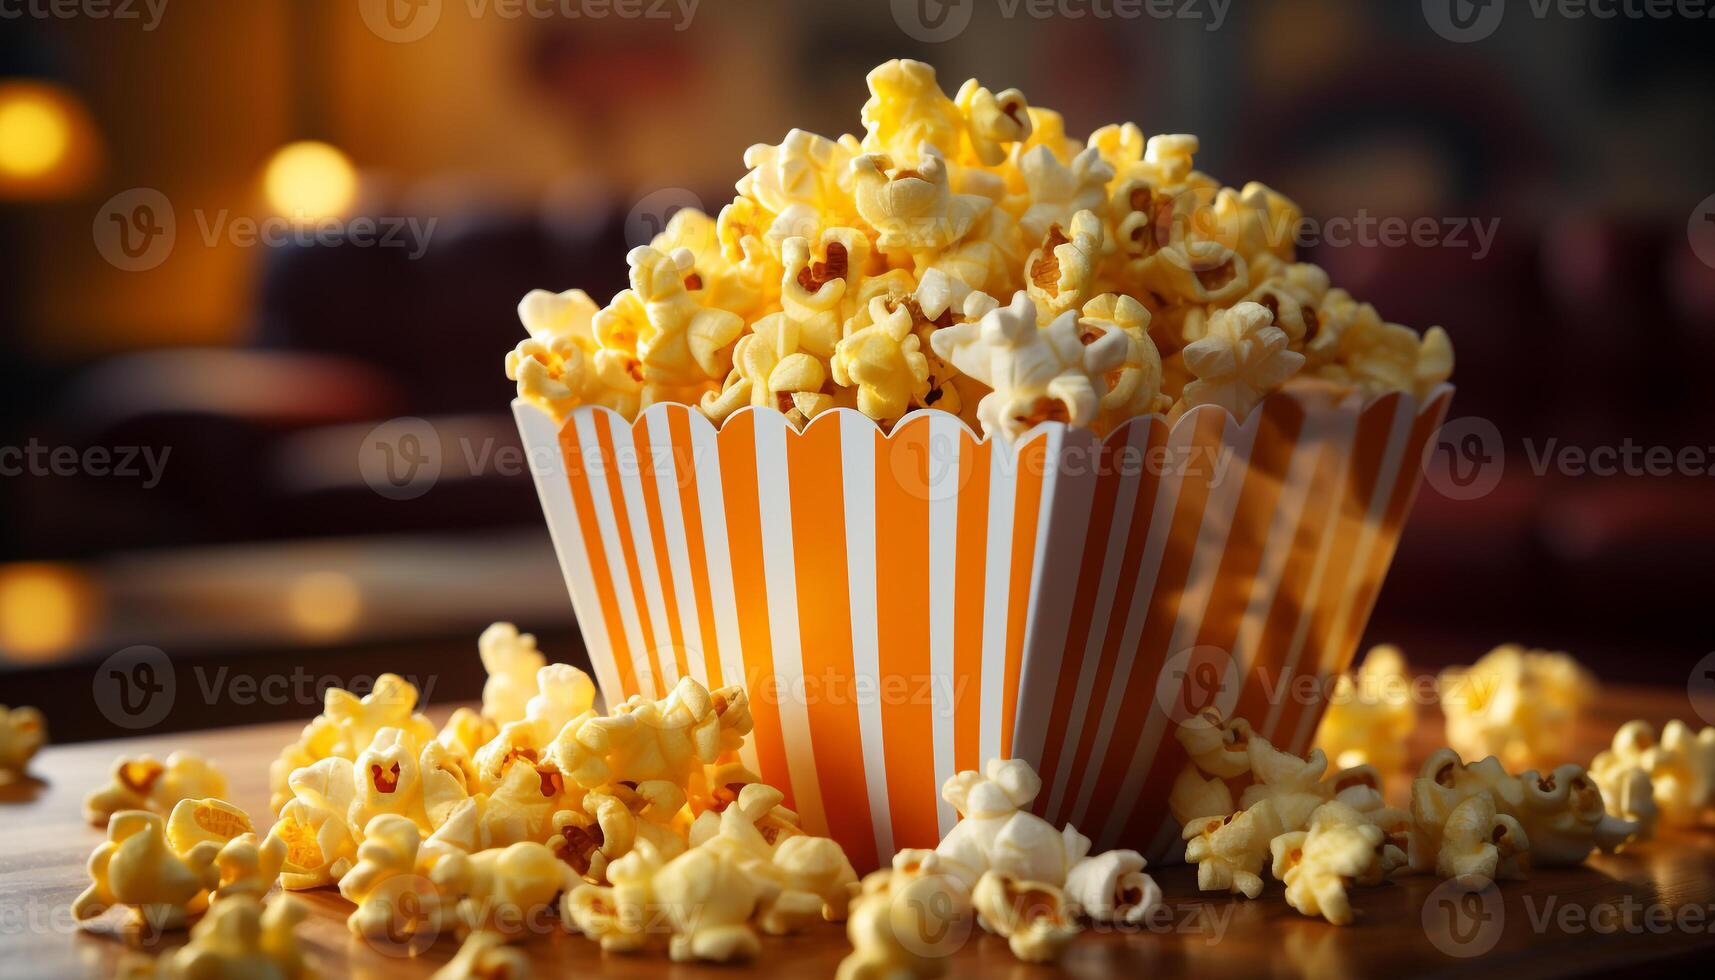 AI generated Watching a movie, snacking on popcorn in a yellow bucket generated by AI photo